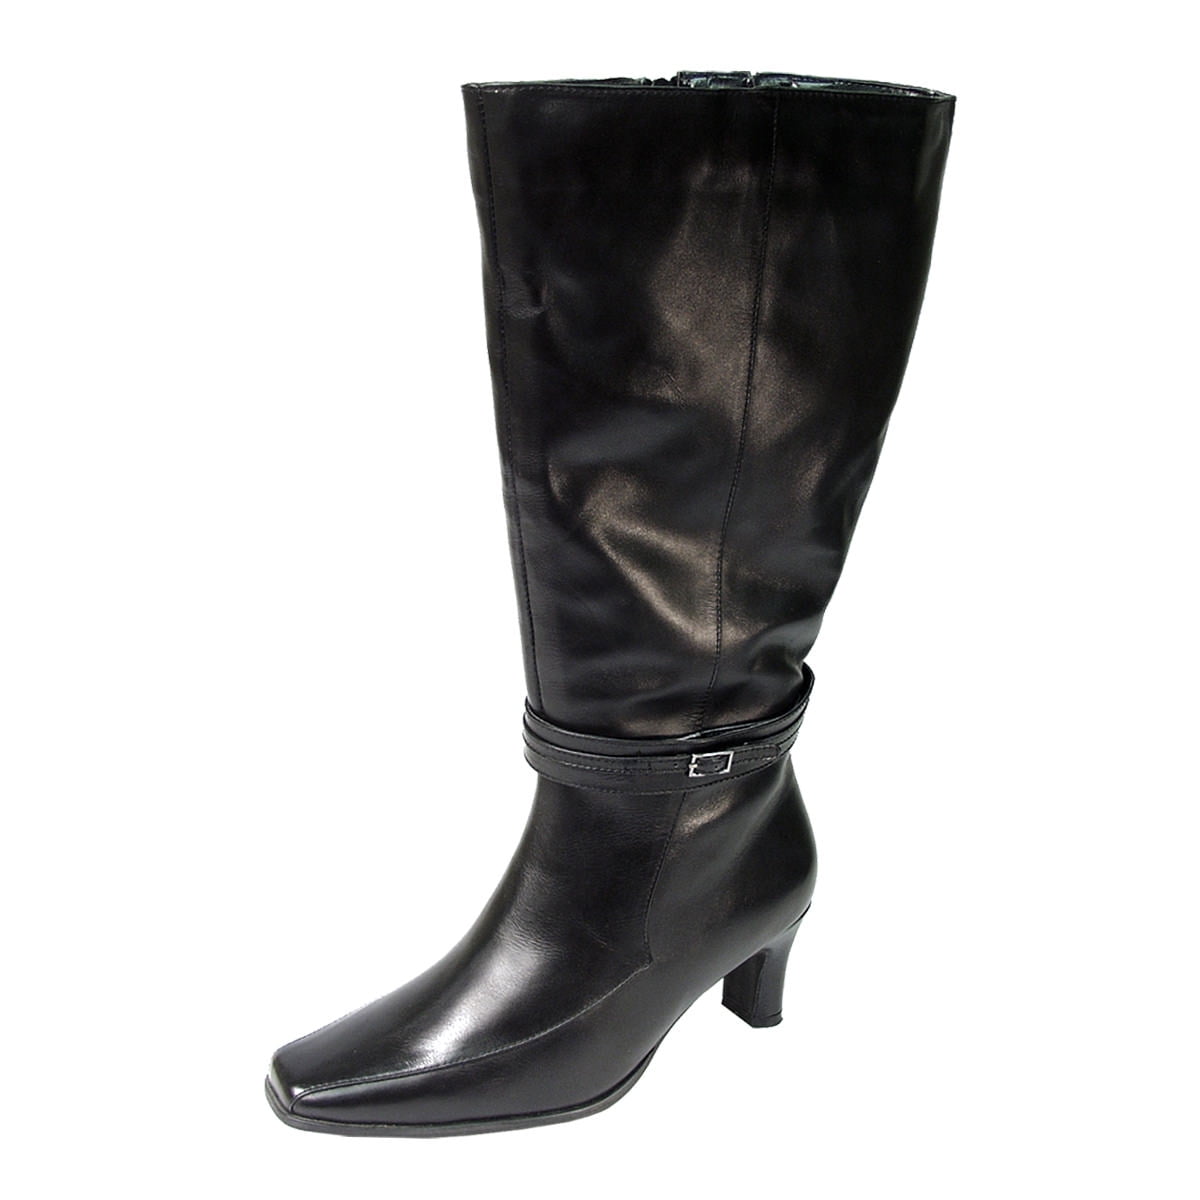 black leather dress boots womens